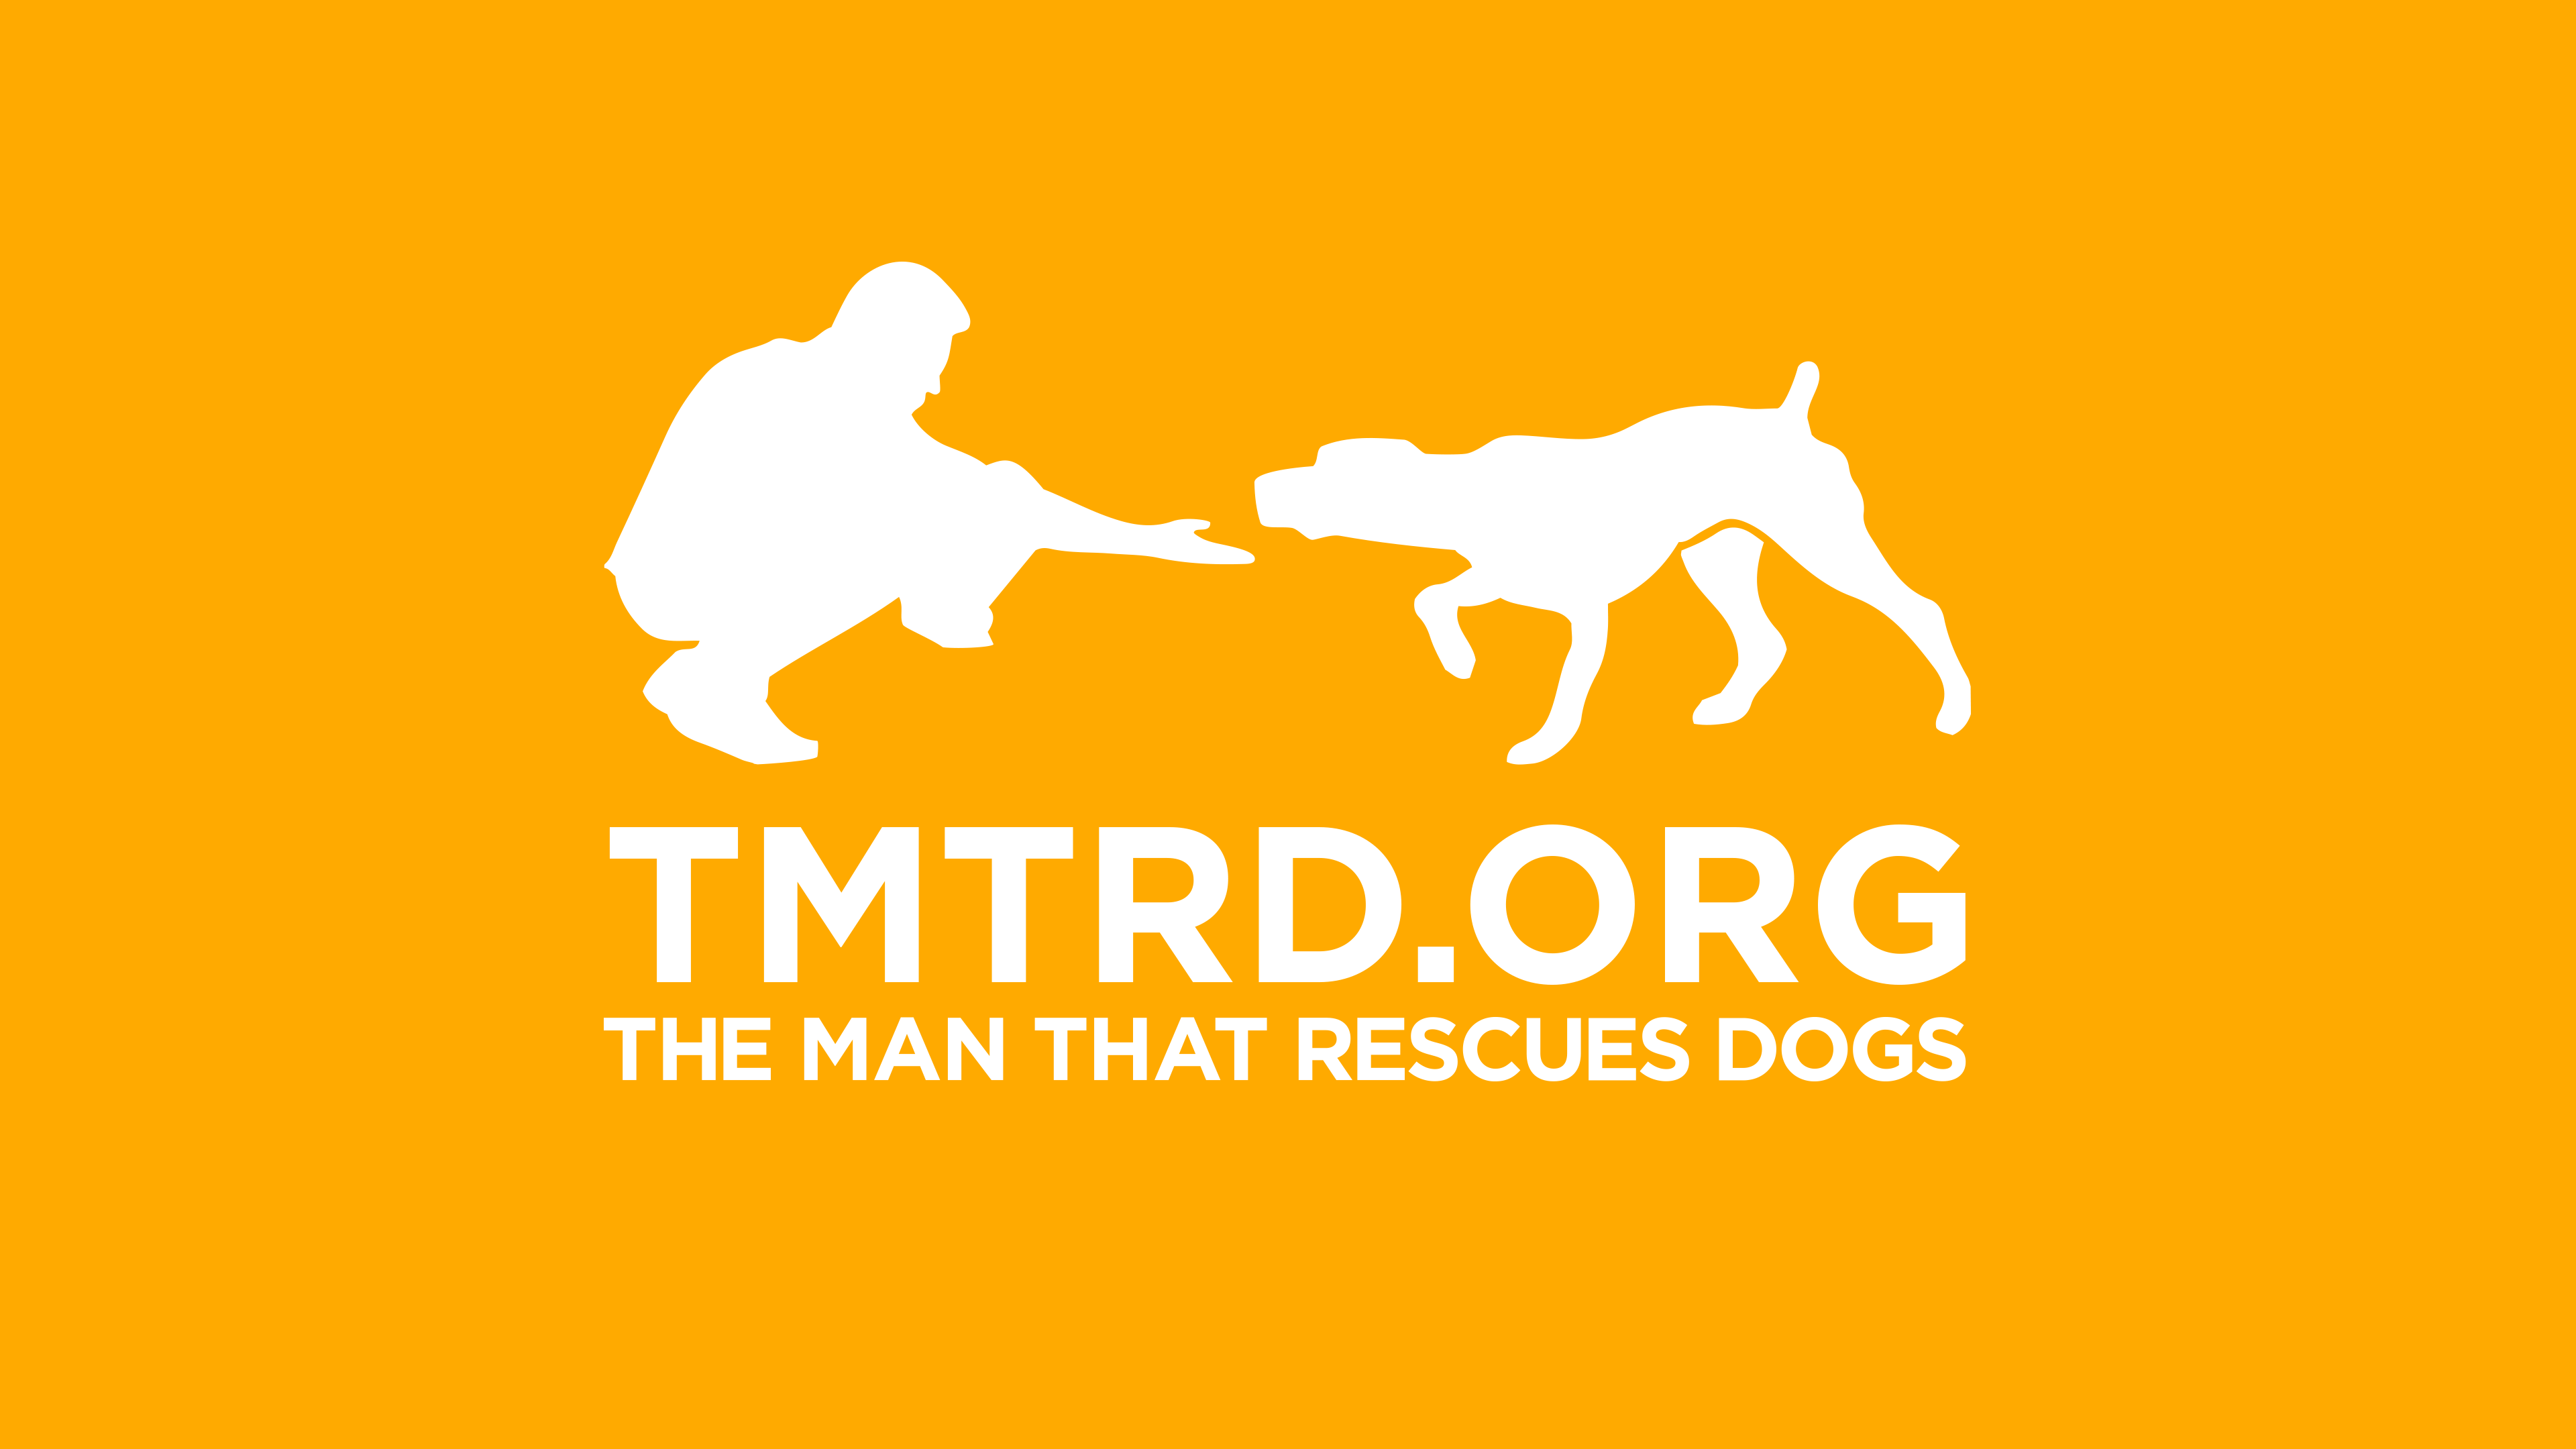 The Man That Rescues Dogs